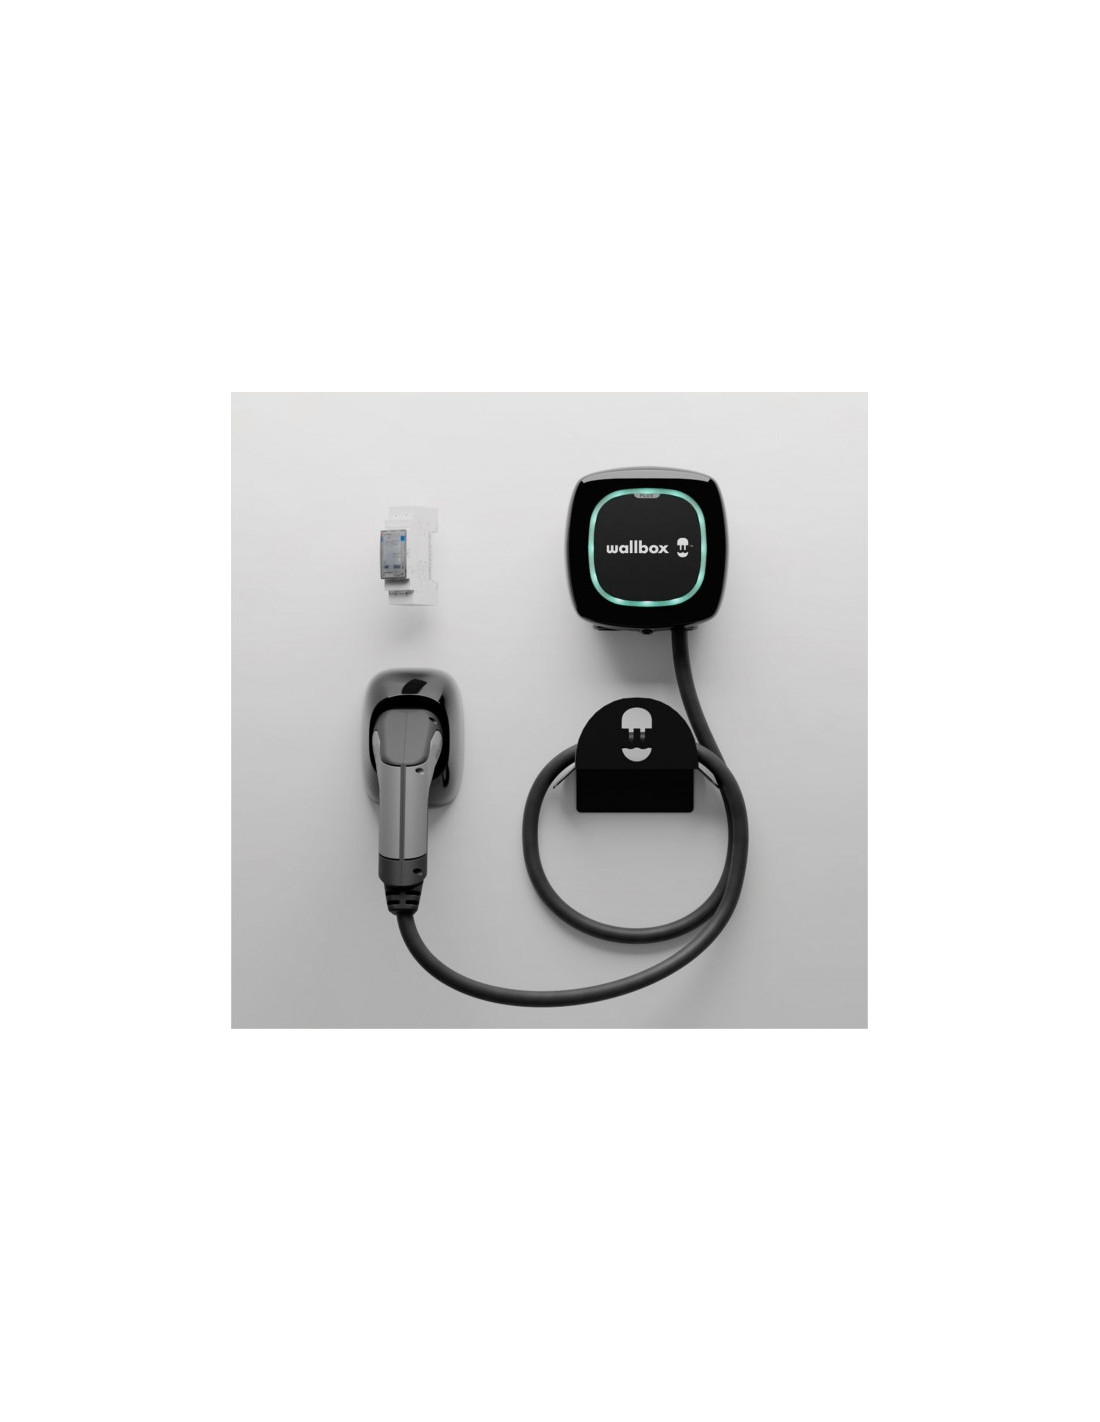 EV 5m, Powerboost Power type + Cable Kit 2, 22kW Wallbox Plus Pulsar + charger, holder